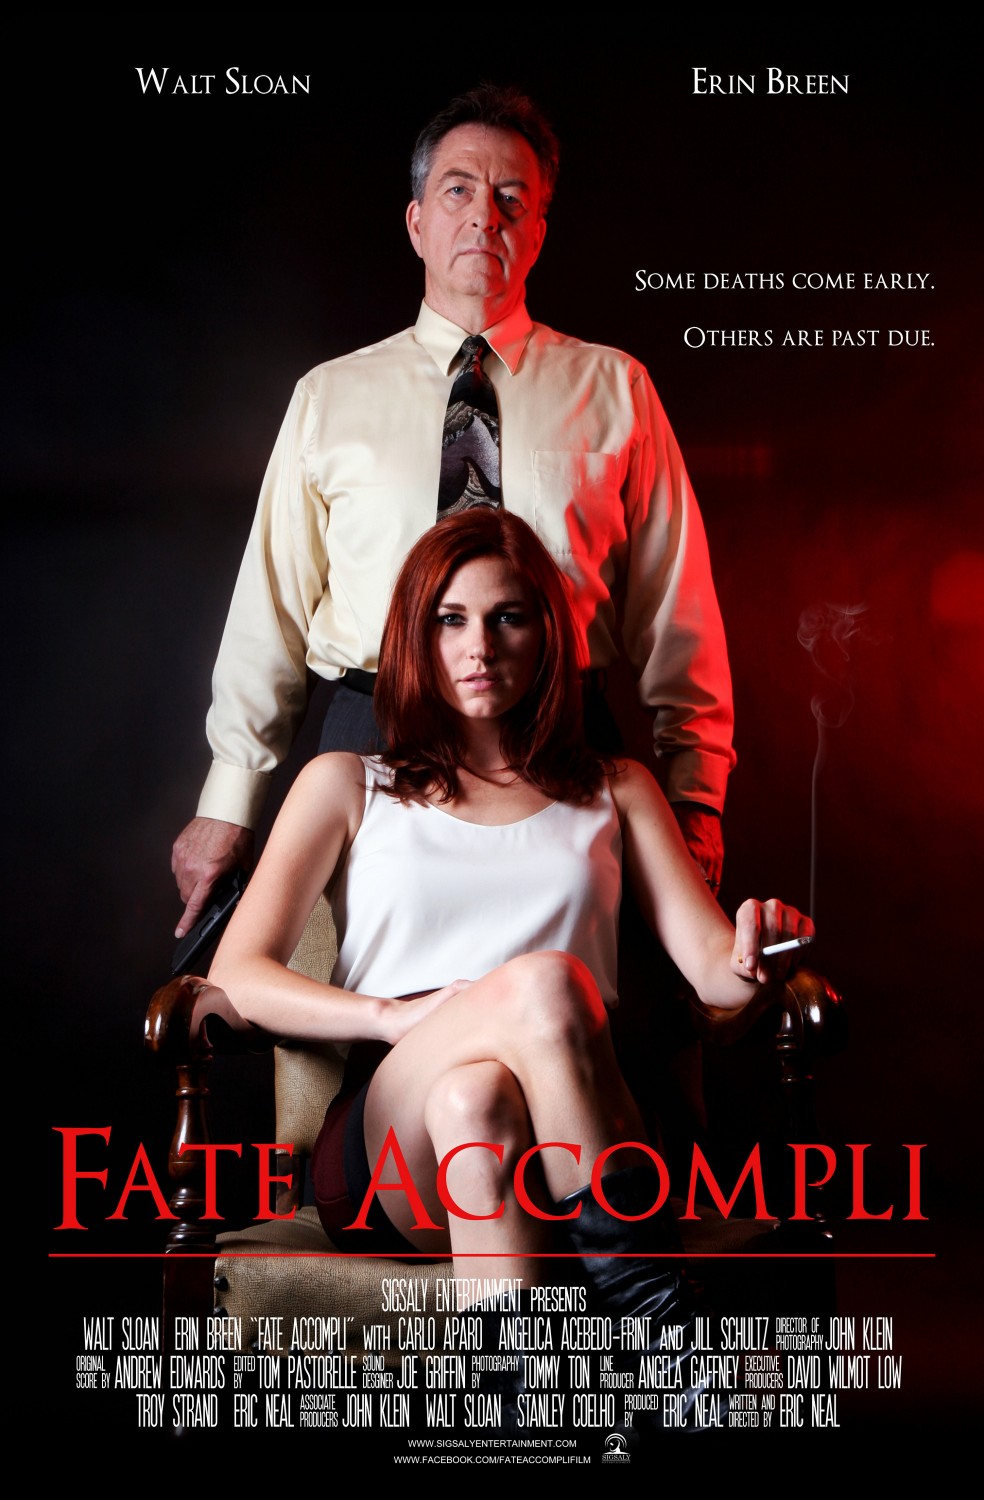 Extra Large Movie Poster Image for Fate Accompli